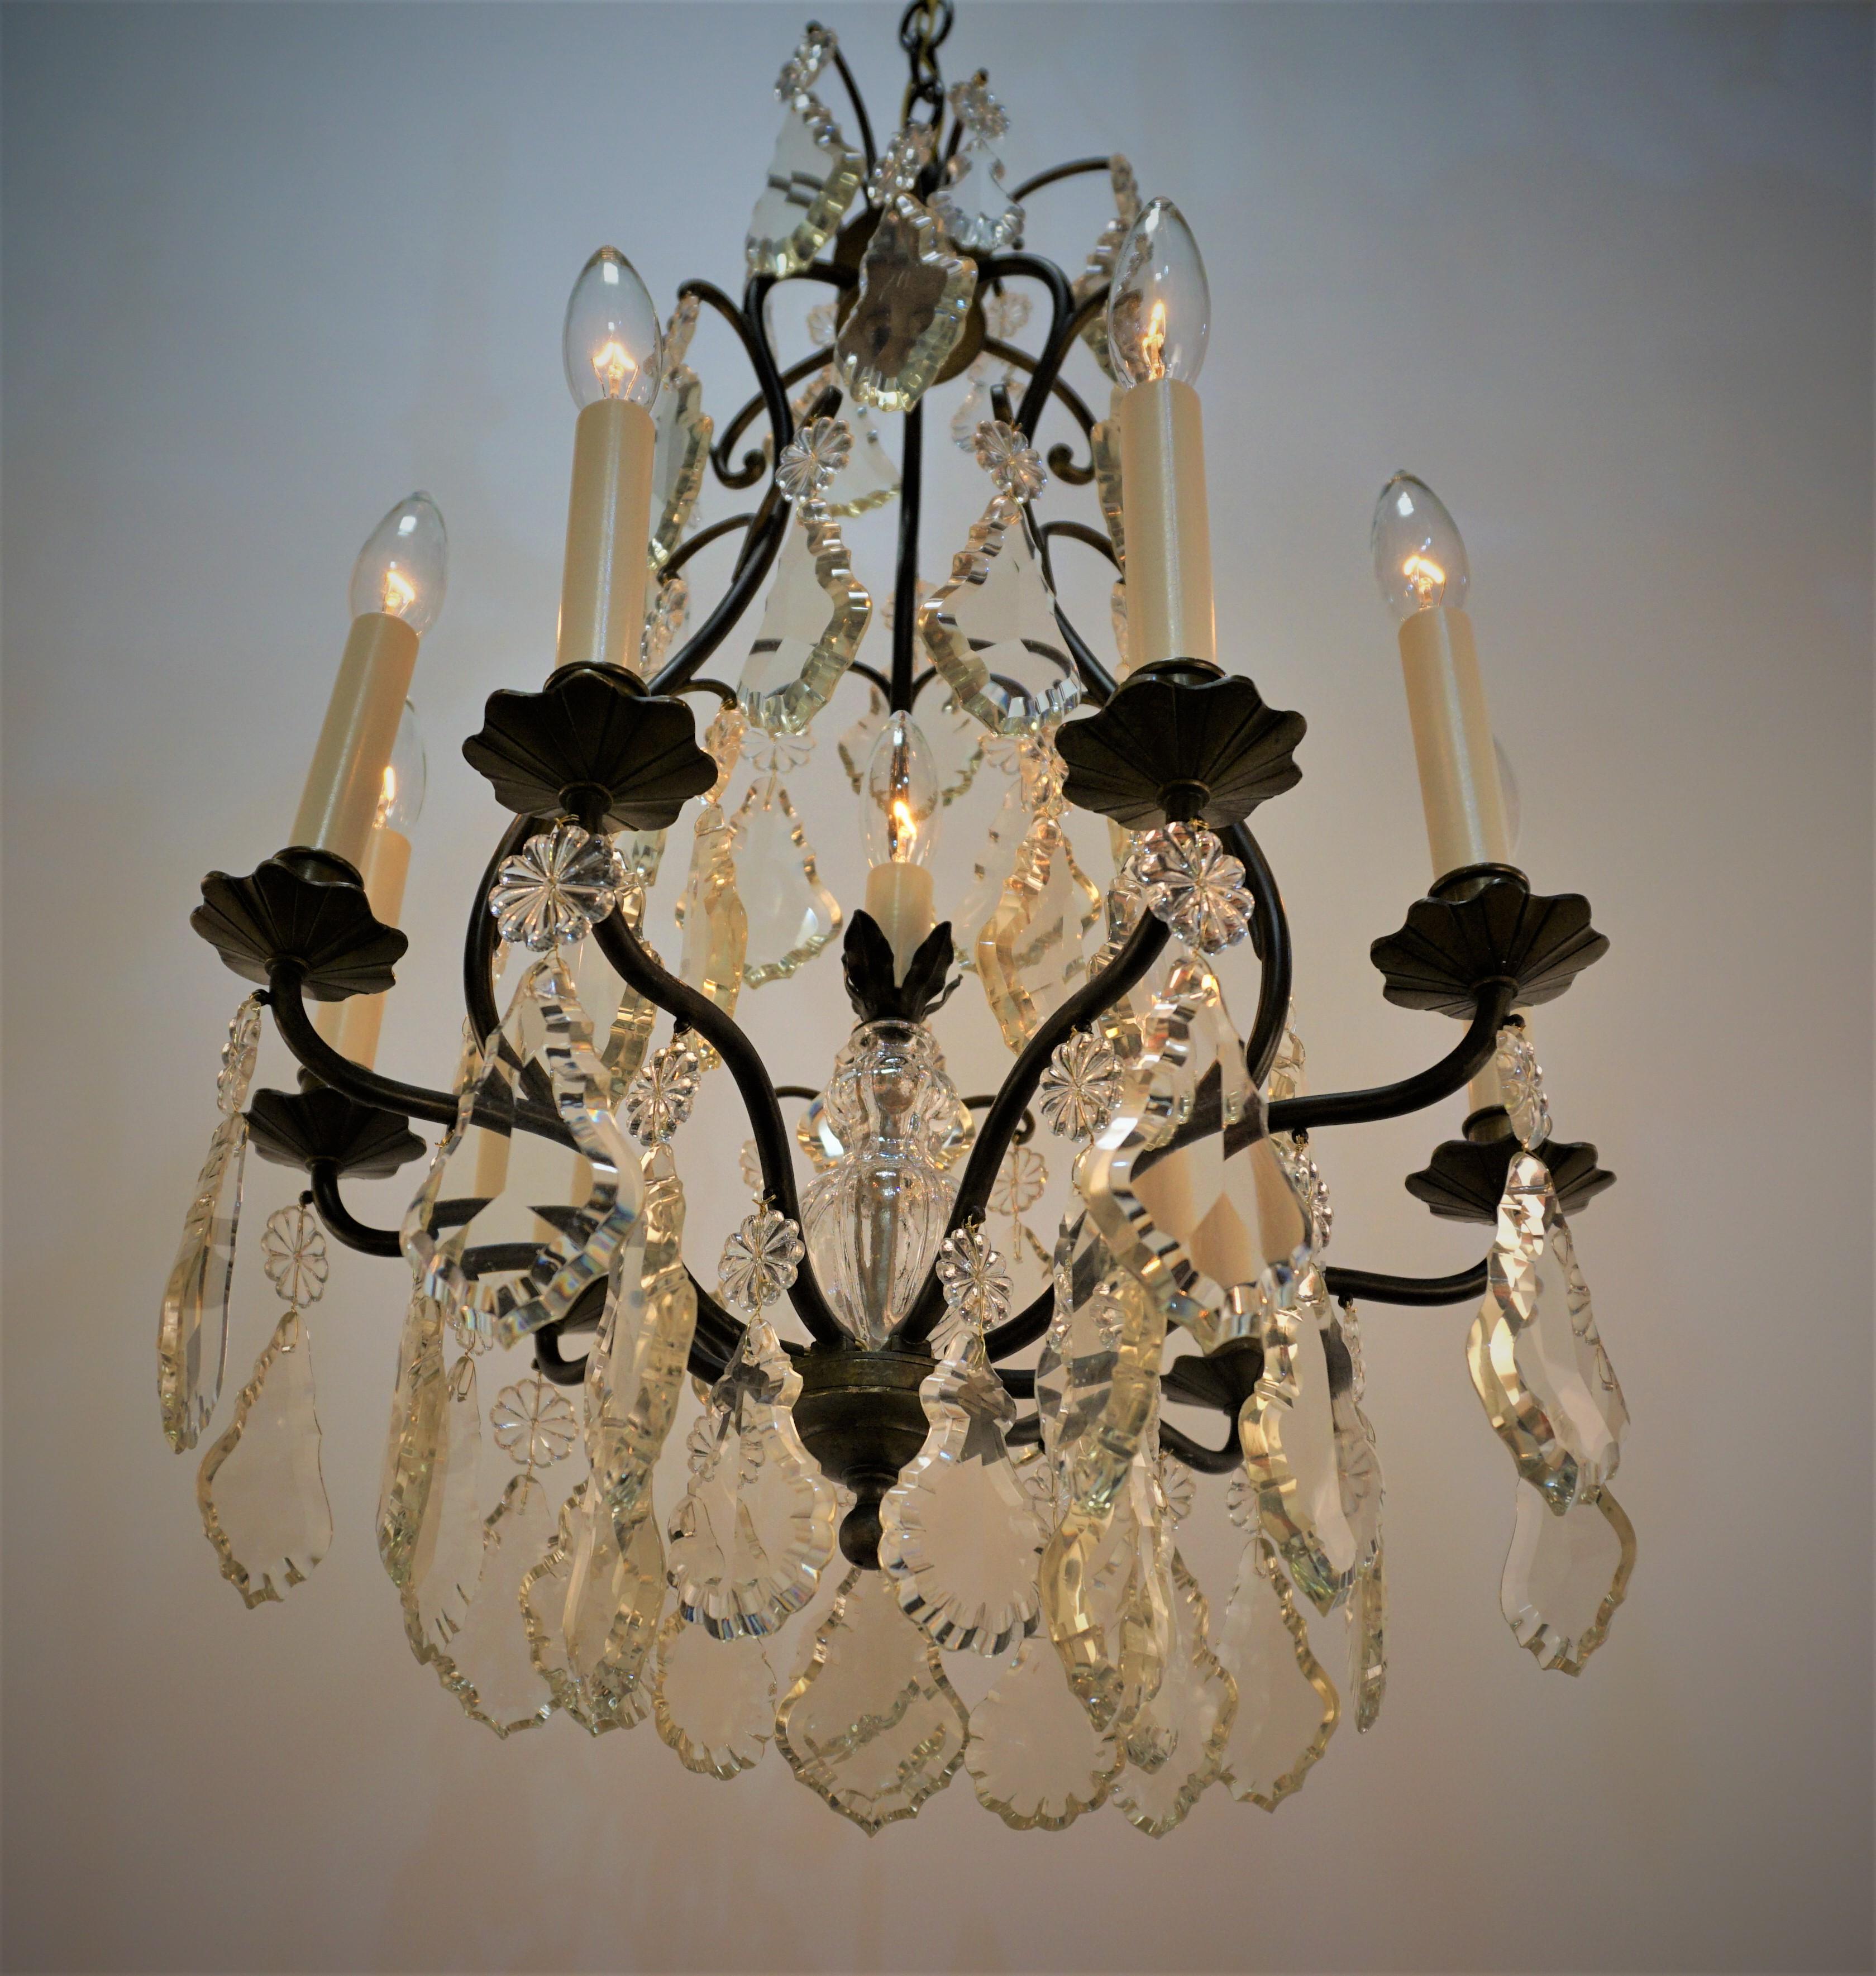 elegant six arm seven light clear and light Champaign color crystal chandelier with bronze frame.
 Minimum height full installed is 32